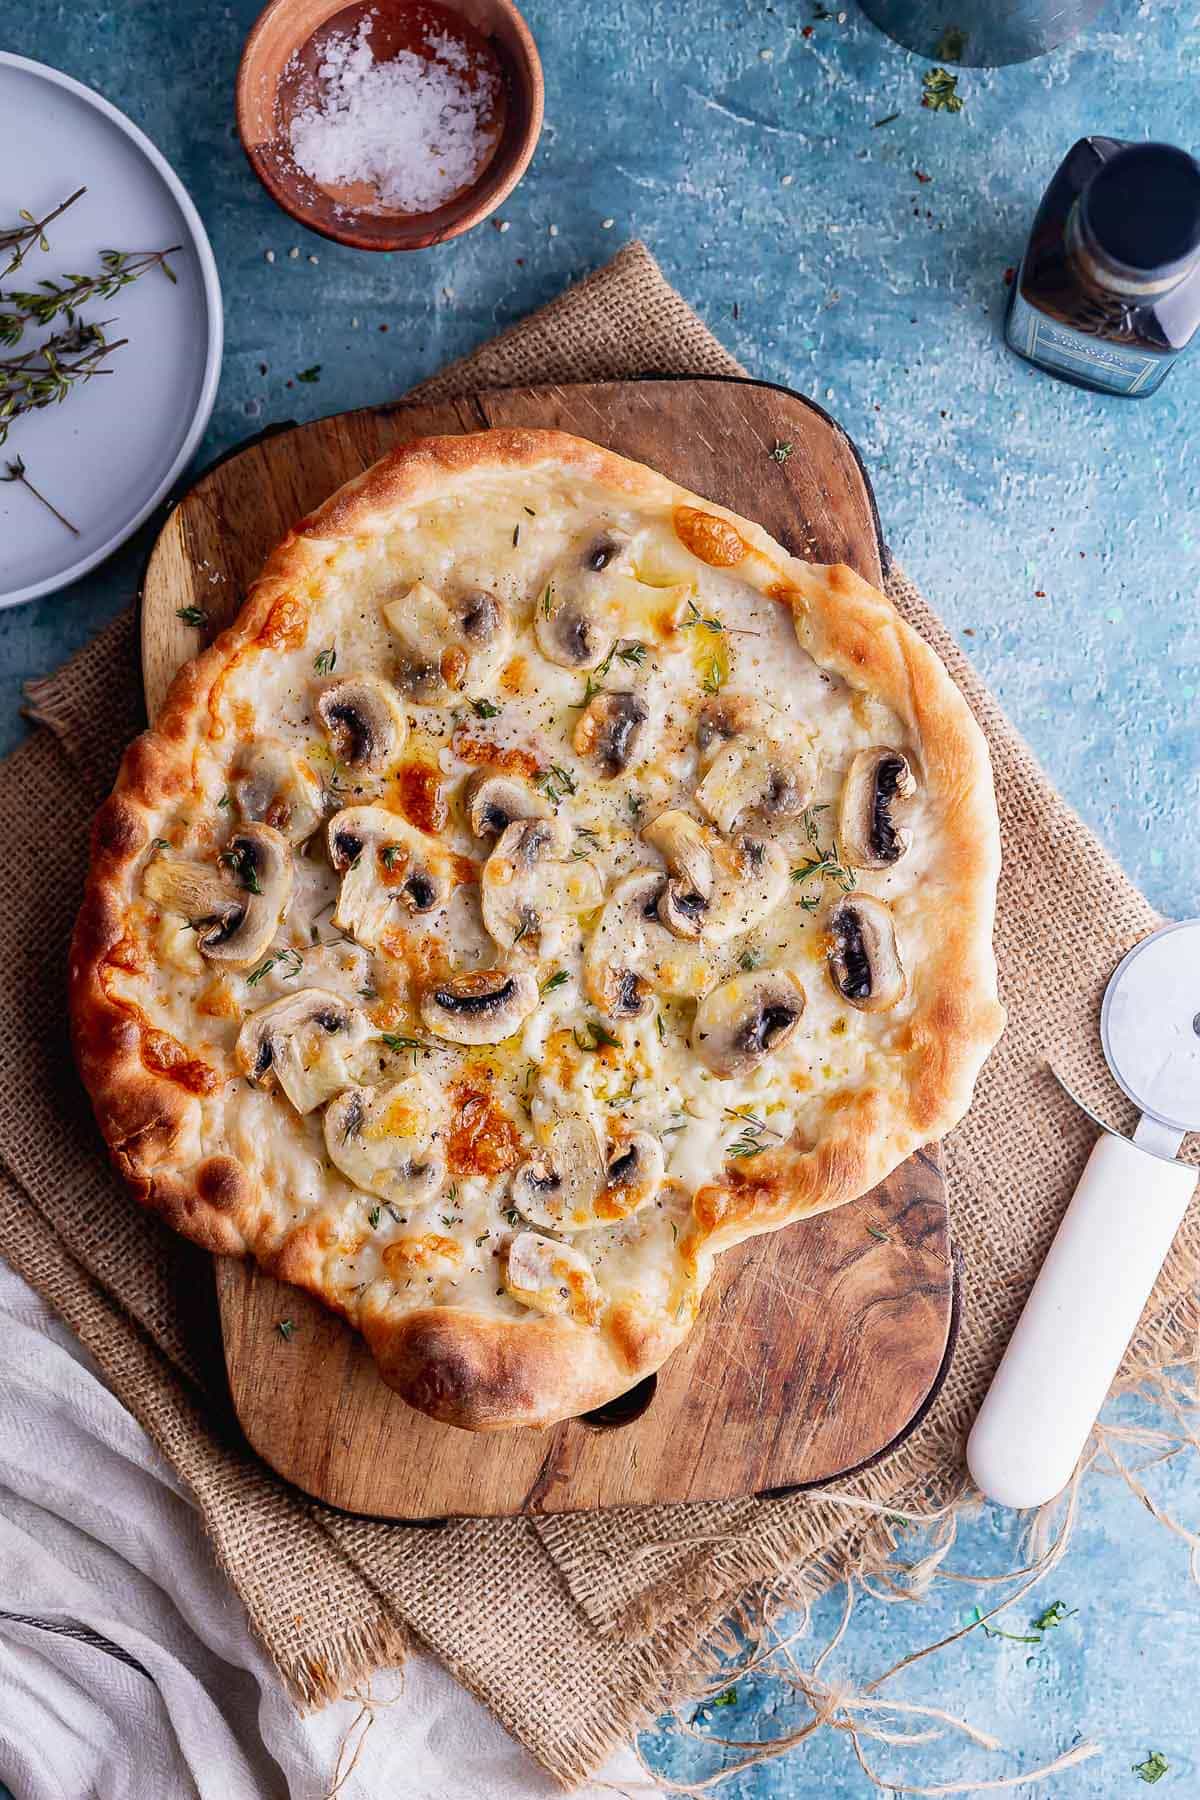 Overhead shot of pizza with mushrooms on a wooden board over a blue background